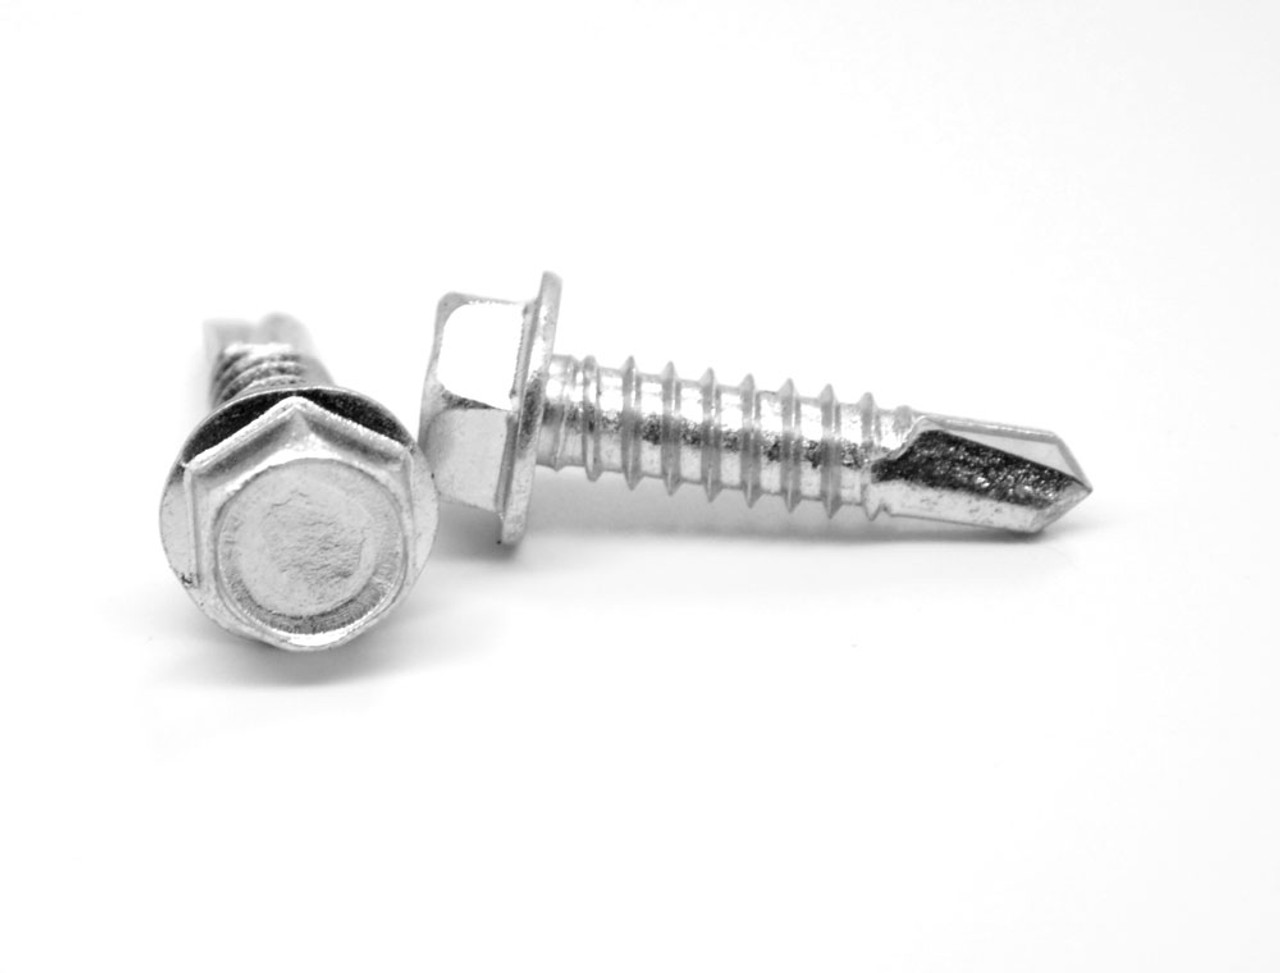 #12-14 x 4" (FT) Self Drilling Screw Hex Washer Head #3 Point Stainless Steel 18-8